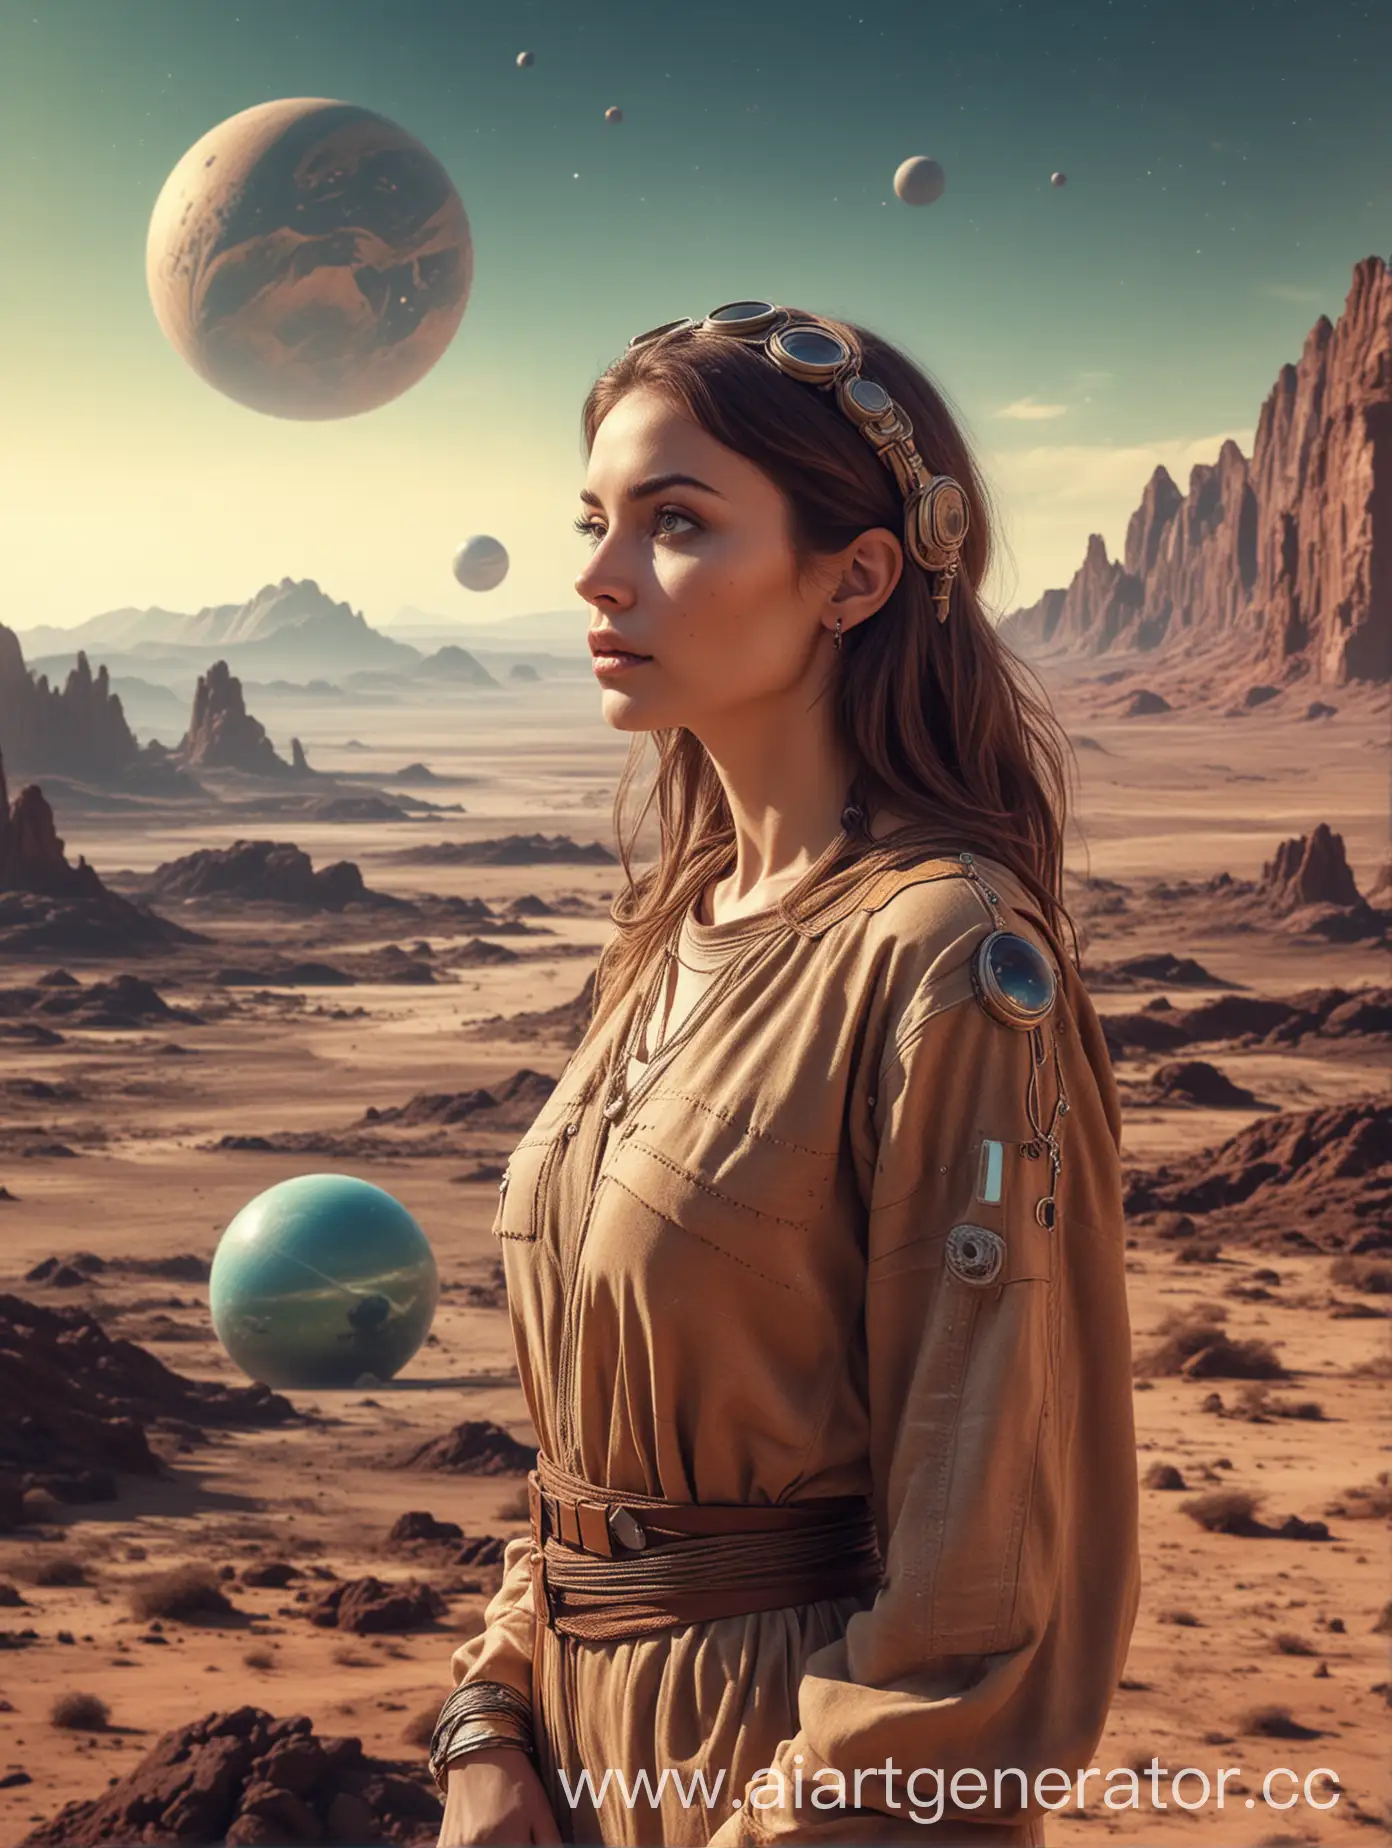 SciFi-Vintage-Design-Beautiful-Woman-in-80s-Hippie-Style-Clothing-on-Alien-Planet